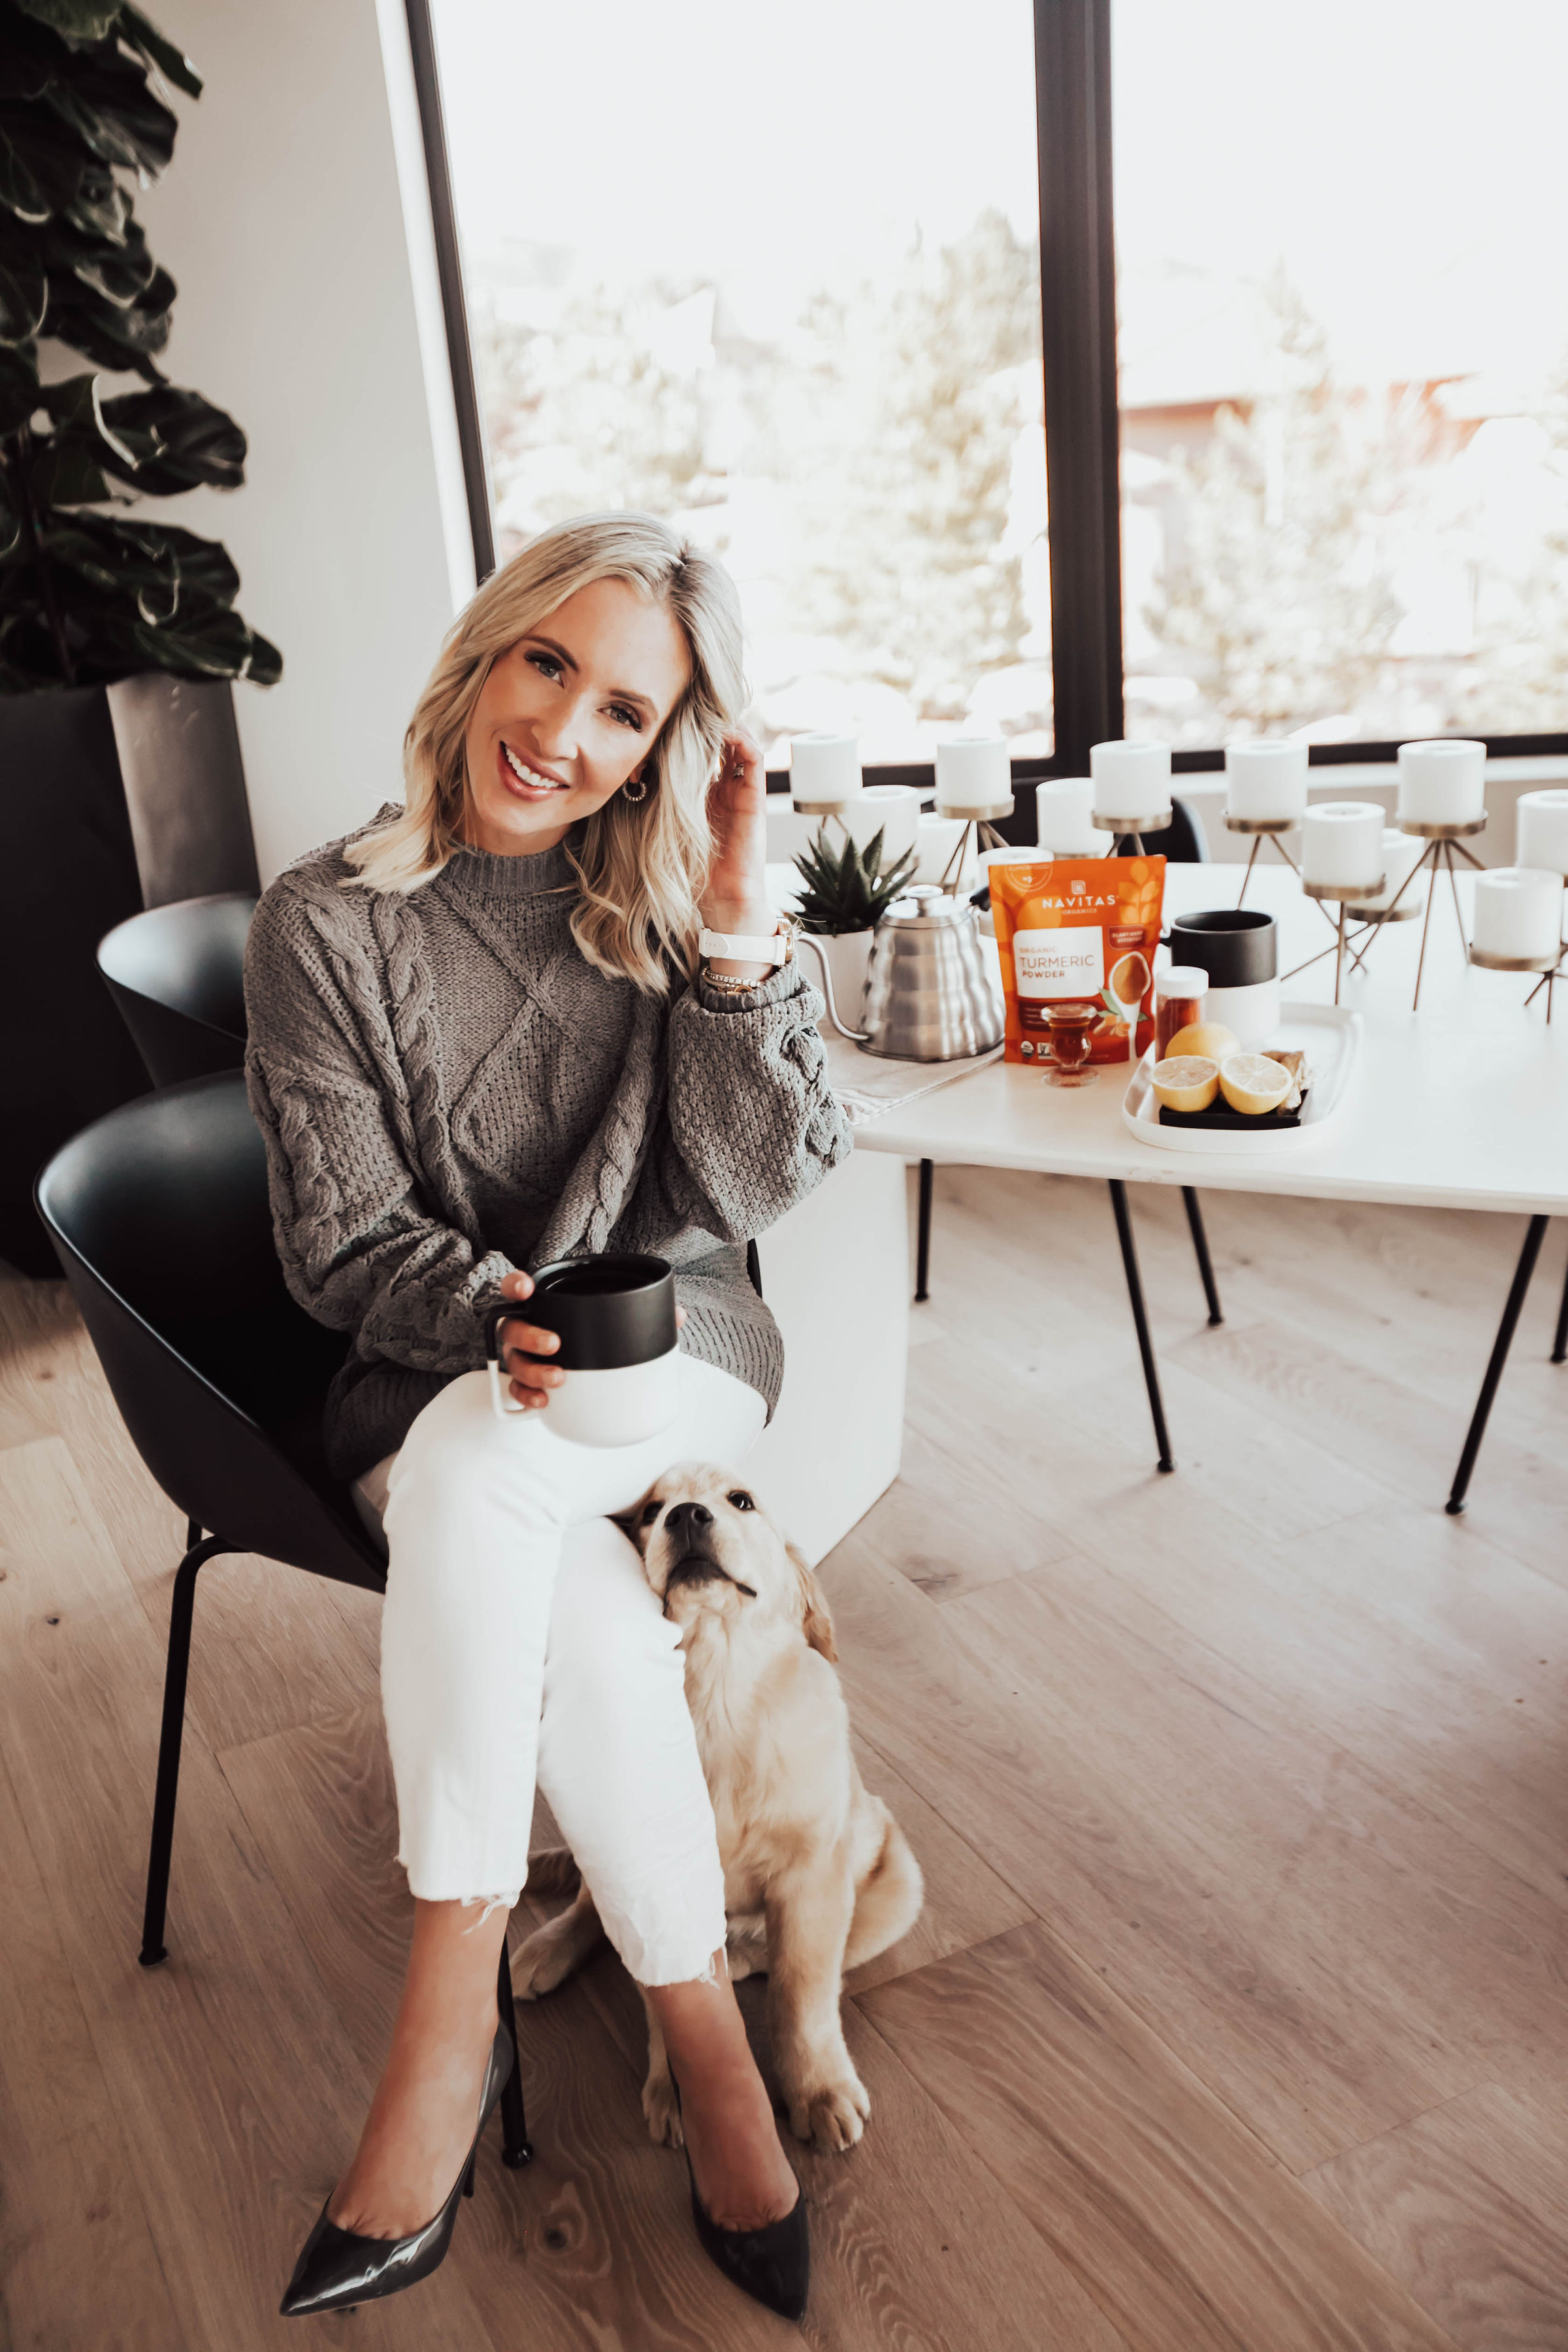 Two Peas in a Prada Cofounder, Emily Farren Wieczorek, shares her favorite holistic remedies for cold and flu season - ginger turmeric tea, lypospheric vitamins and more! 